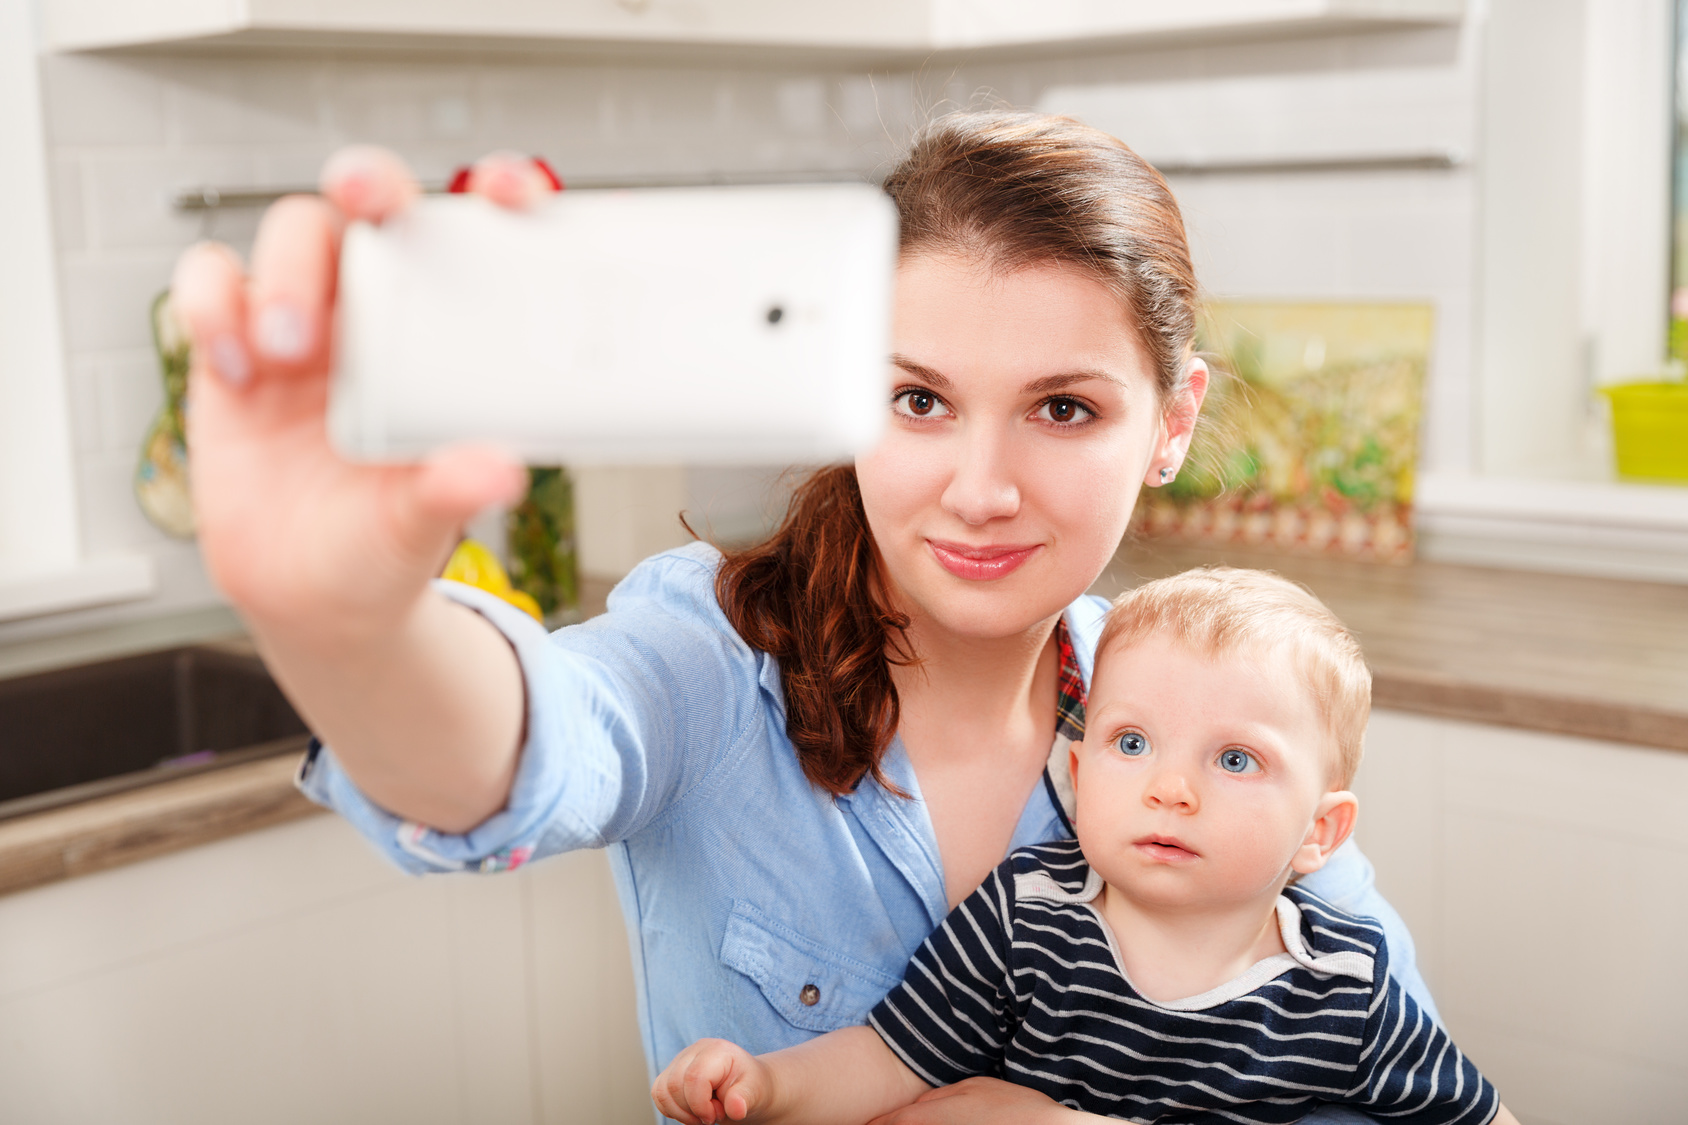 Mother and baby photographing selfie themselves by mobile